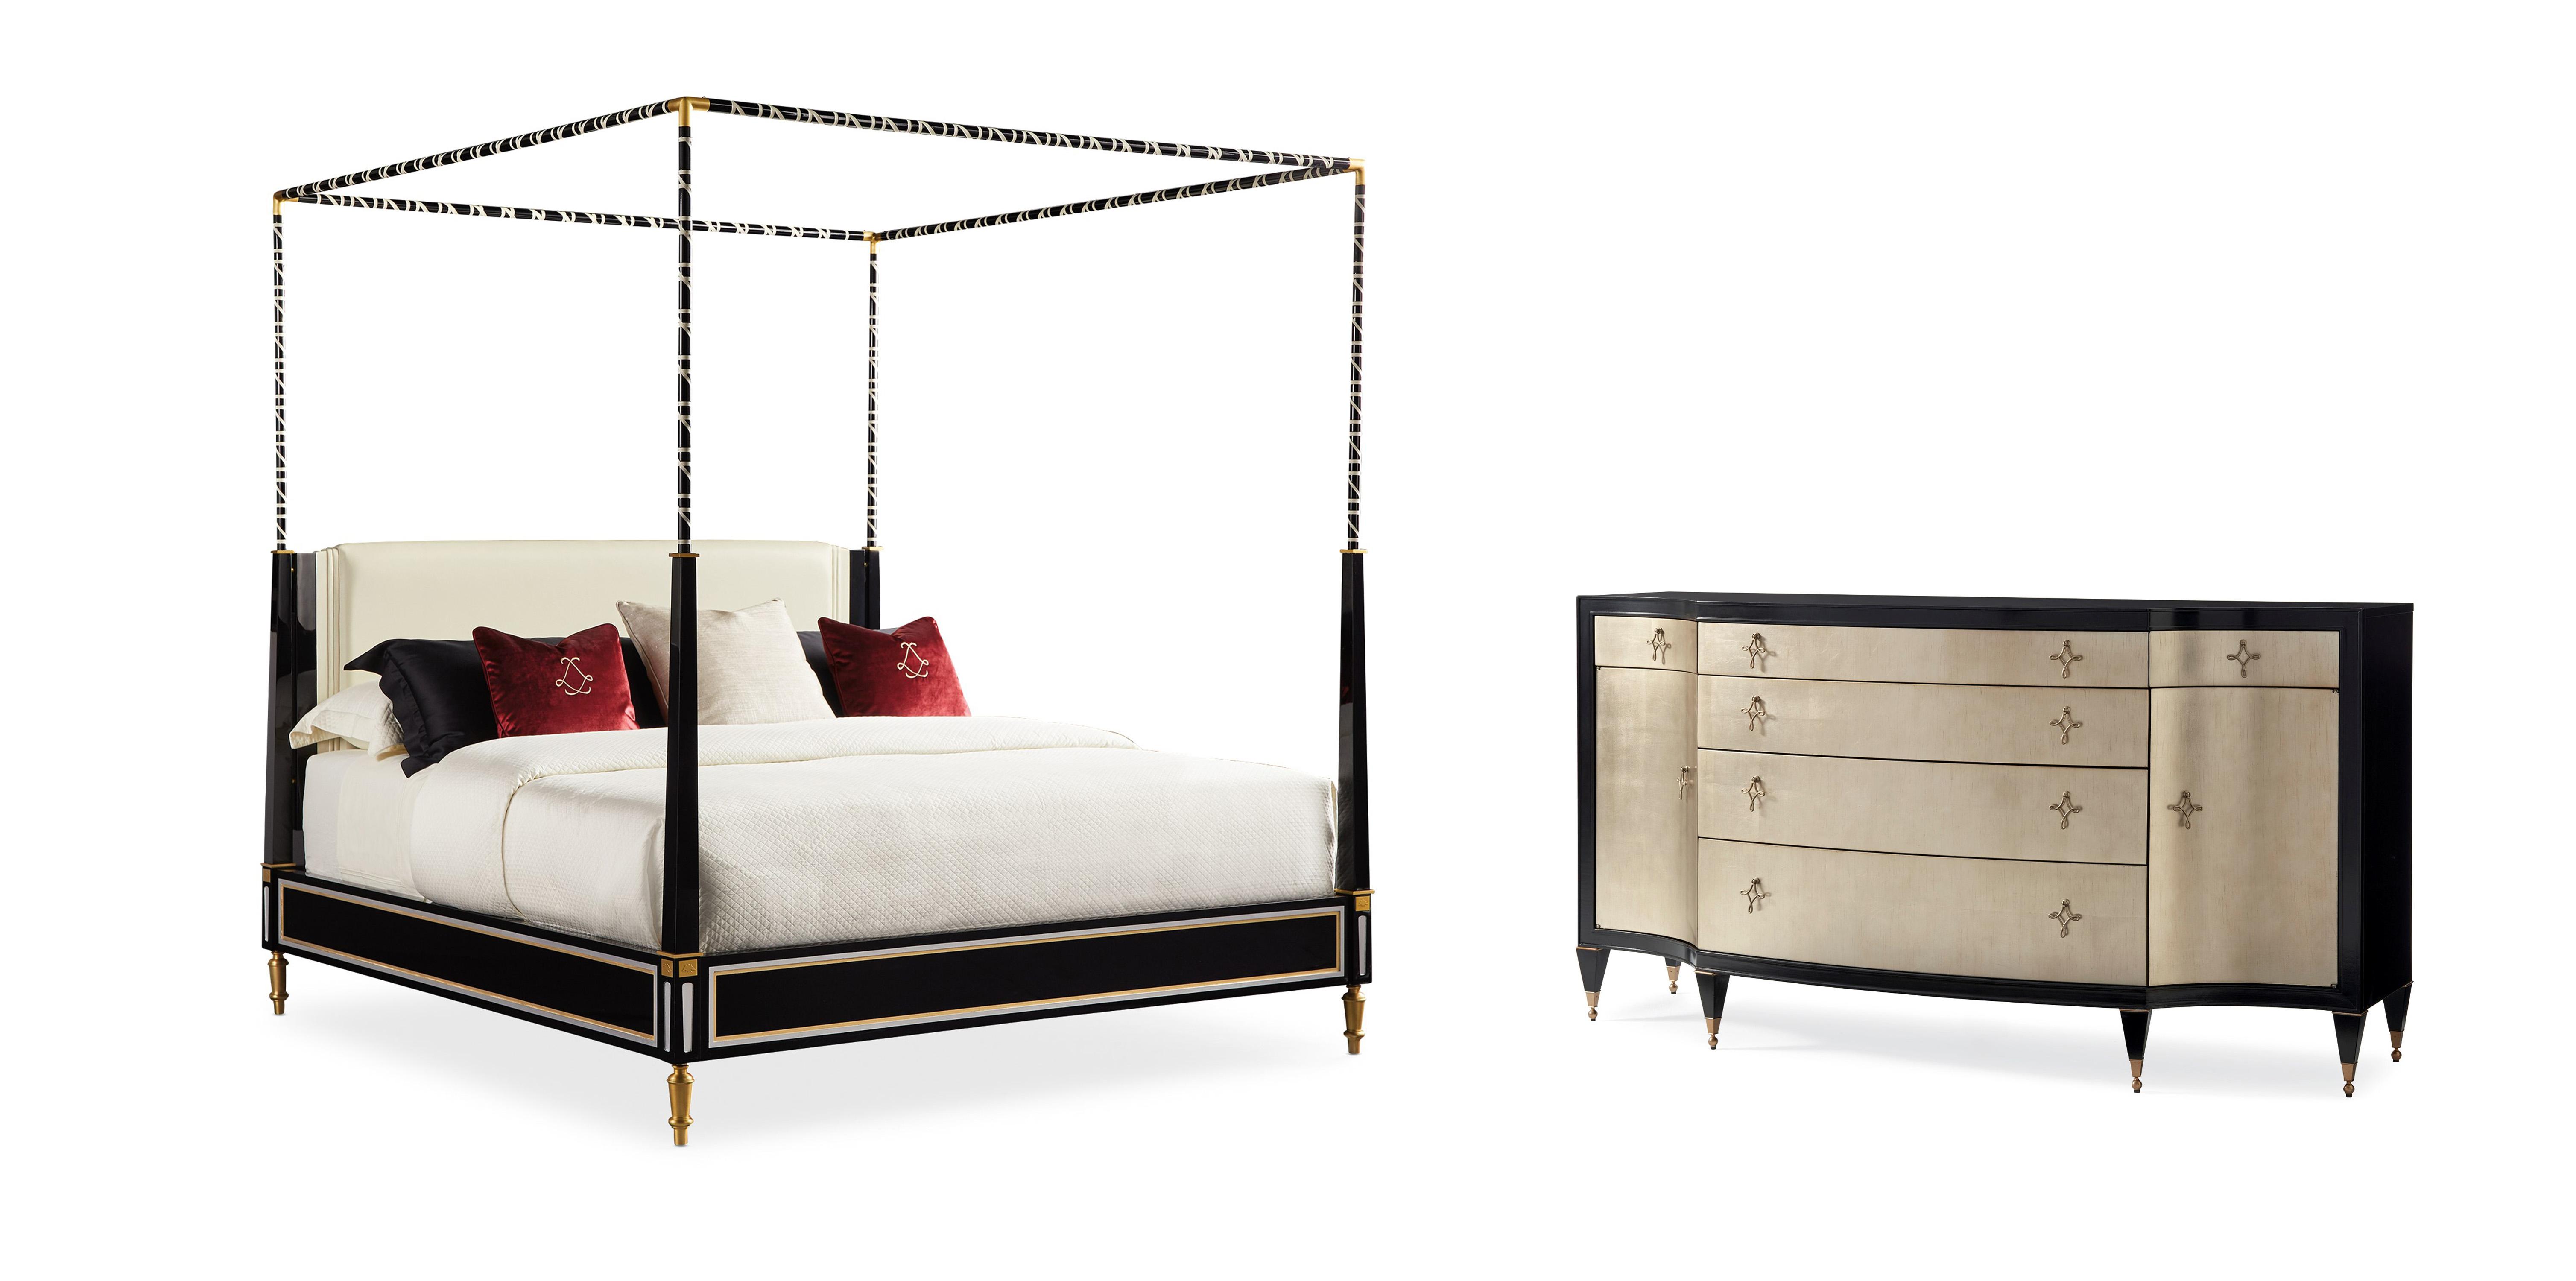   THE COUTURIER CANOPY BED / OPPOSITES ATTRACT  